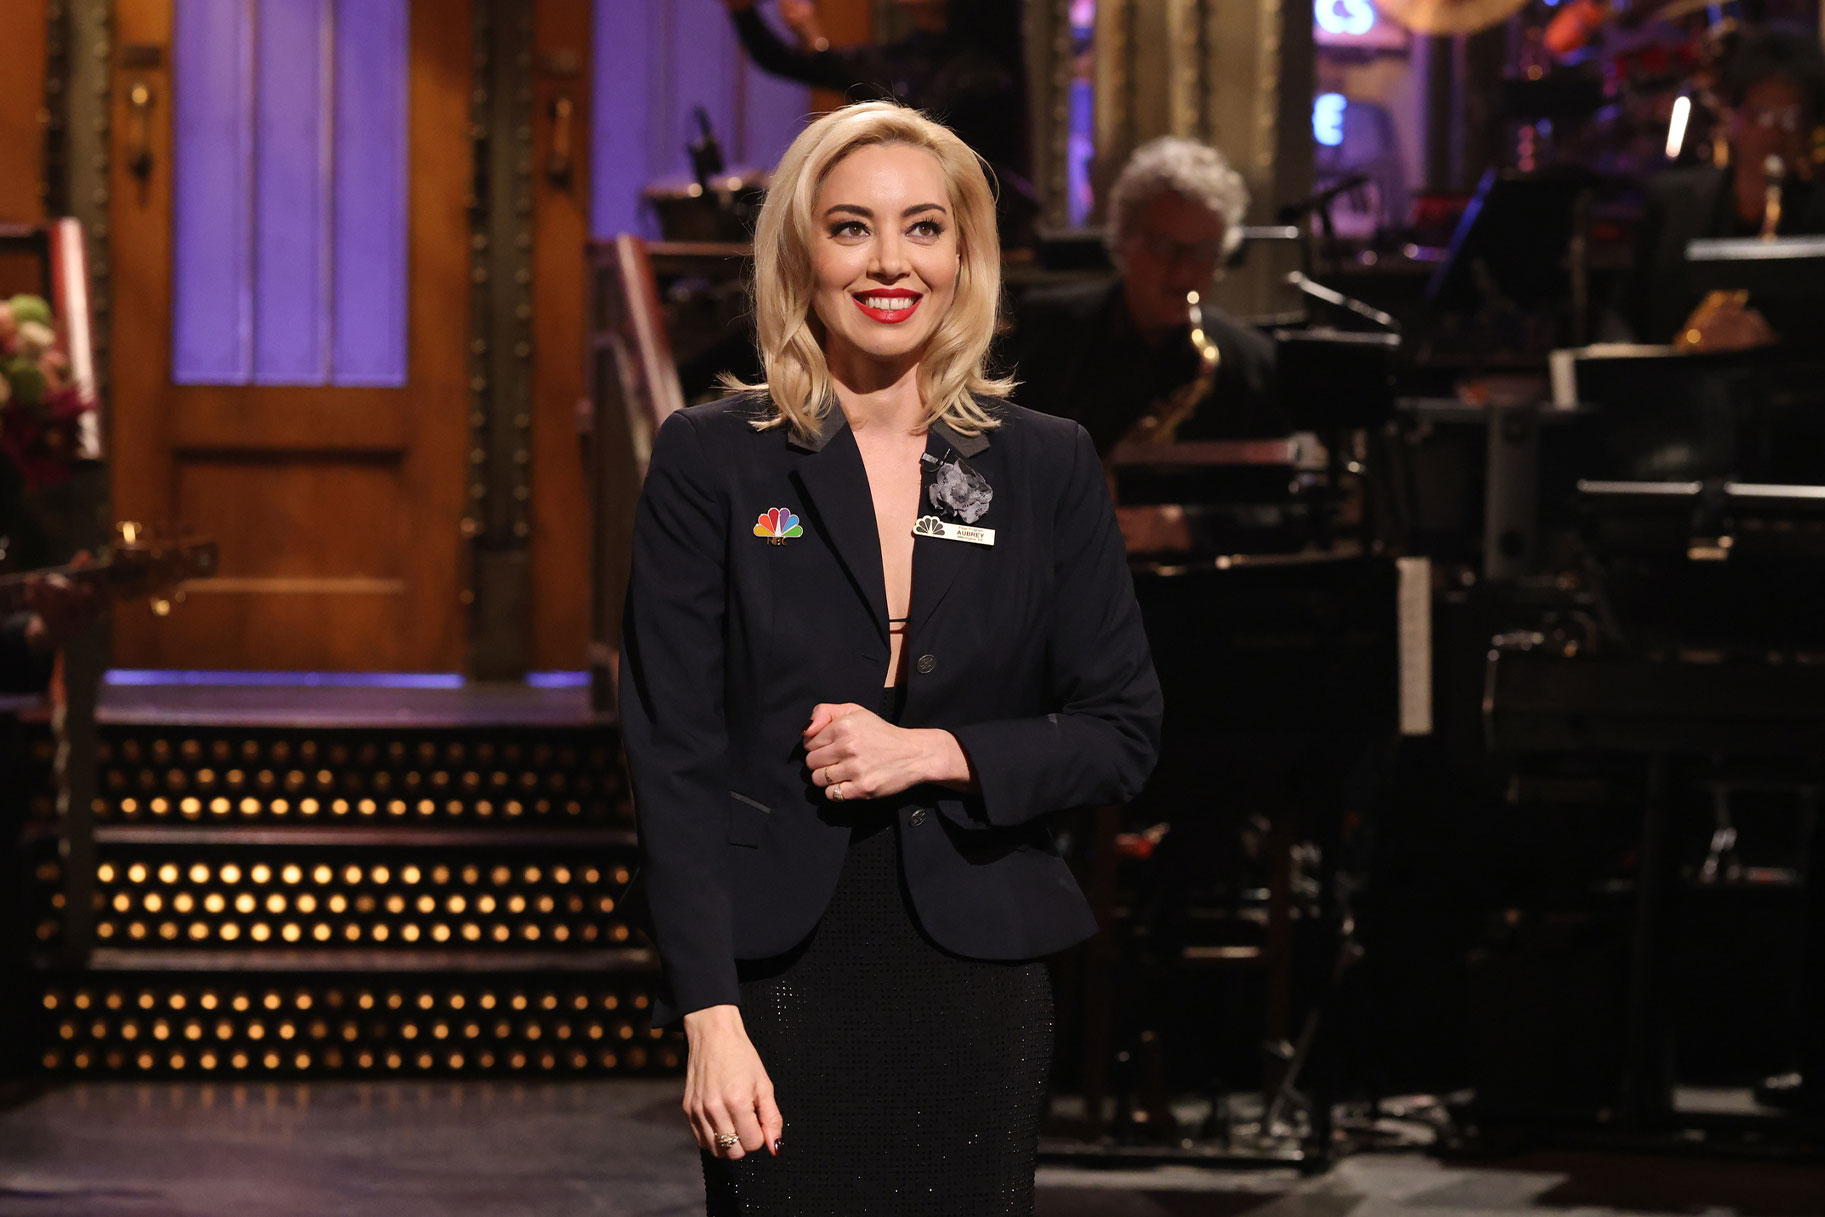 Watch Aubrey Plaza's Hilarious SNL Opening Monologue and Sketches